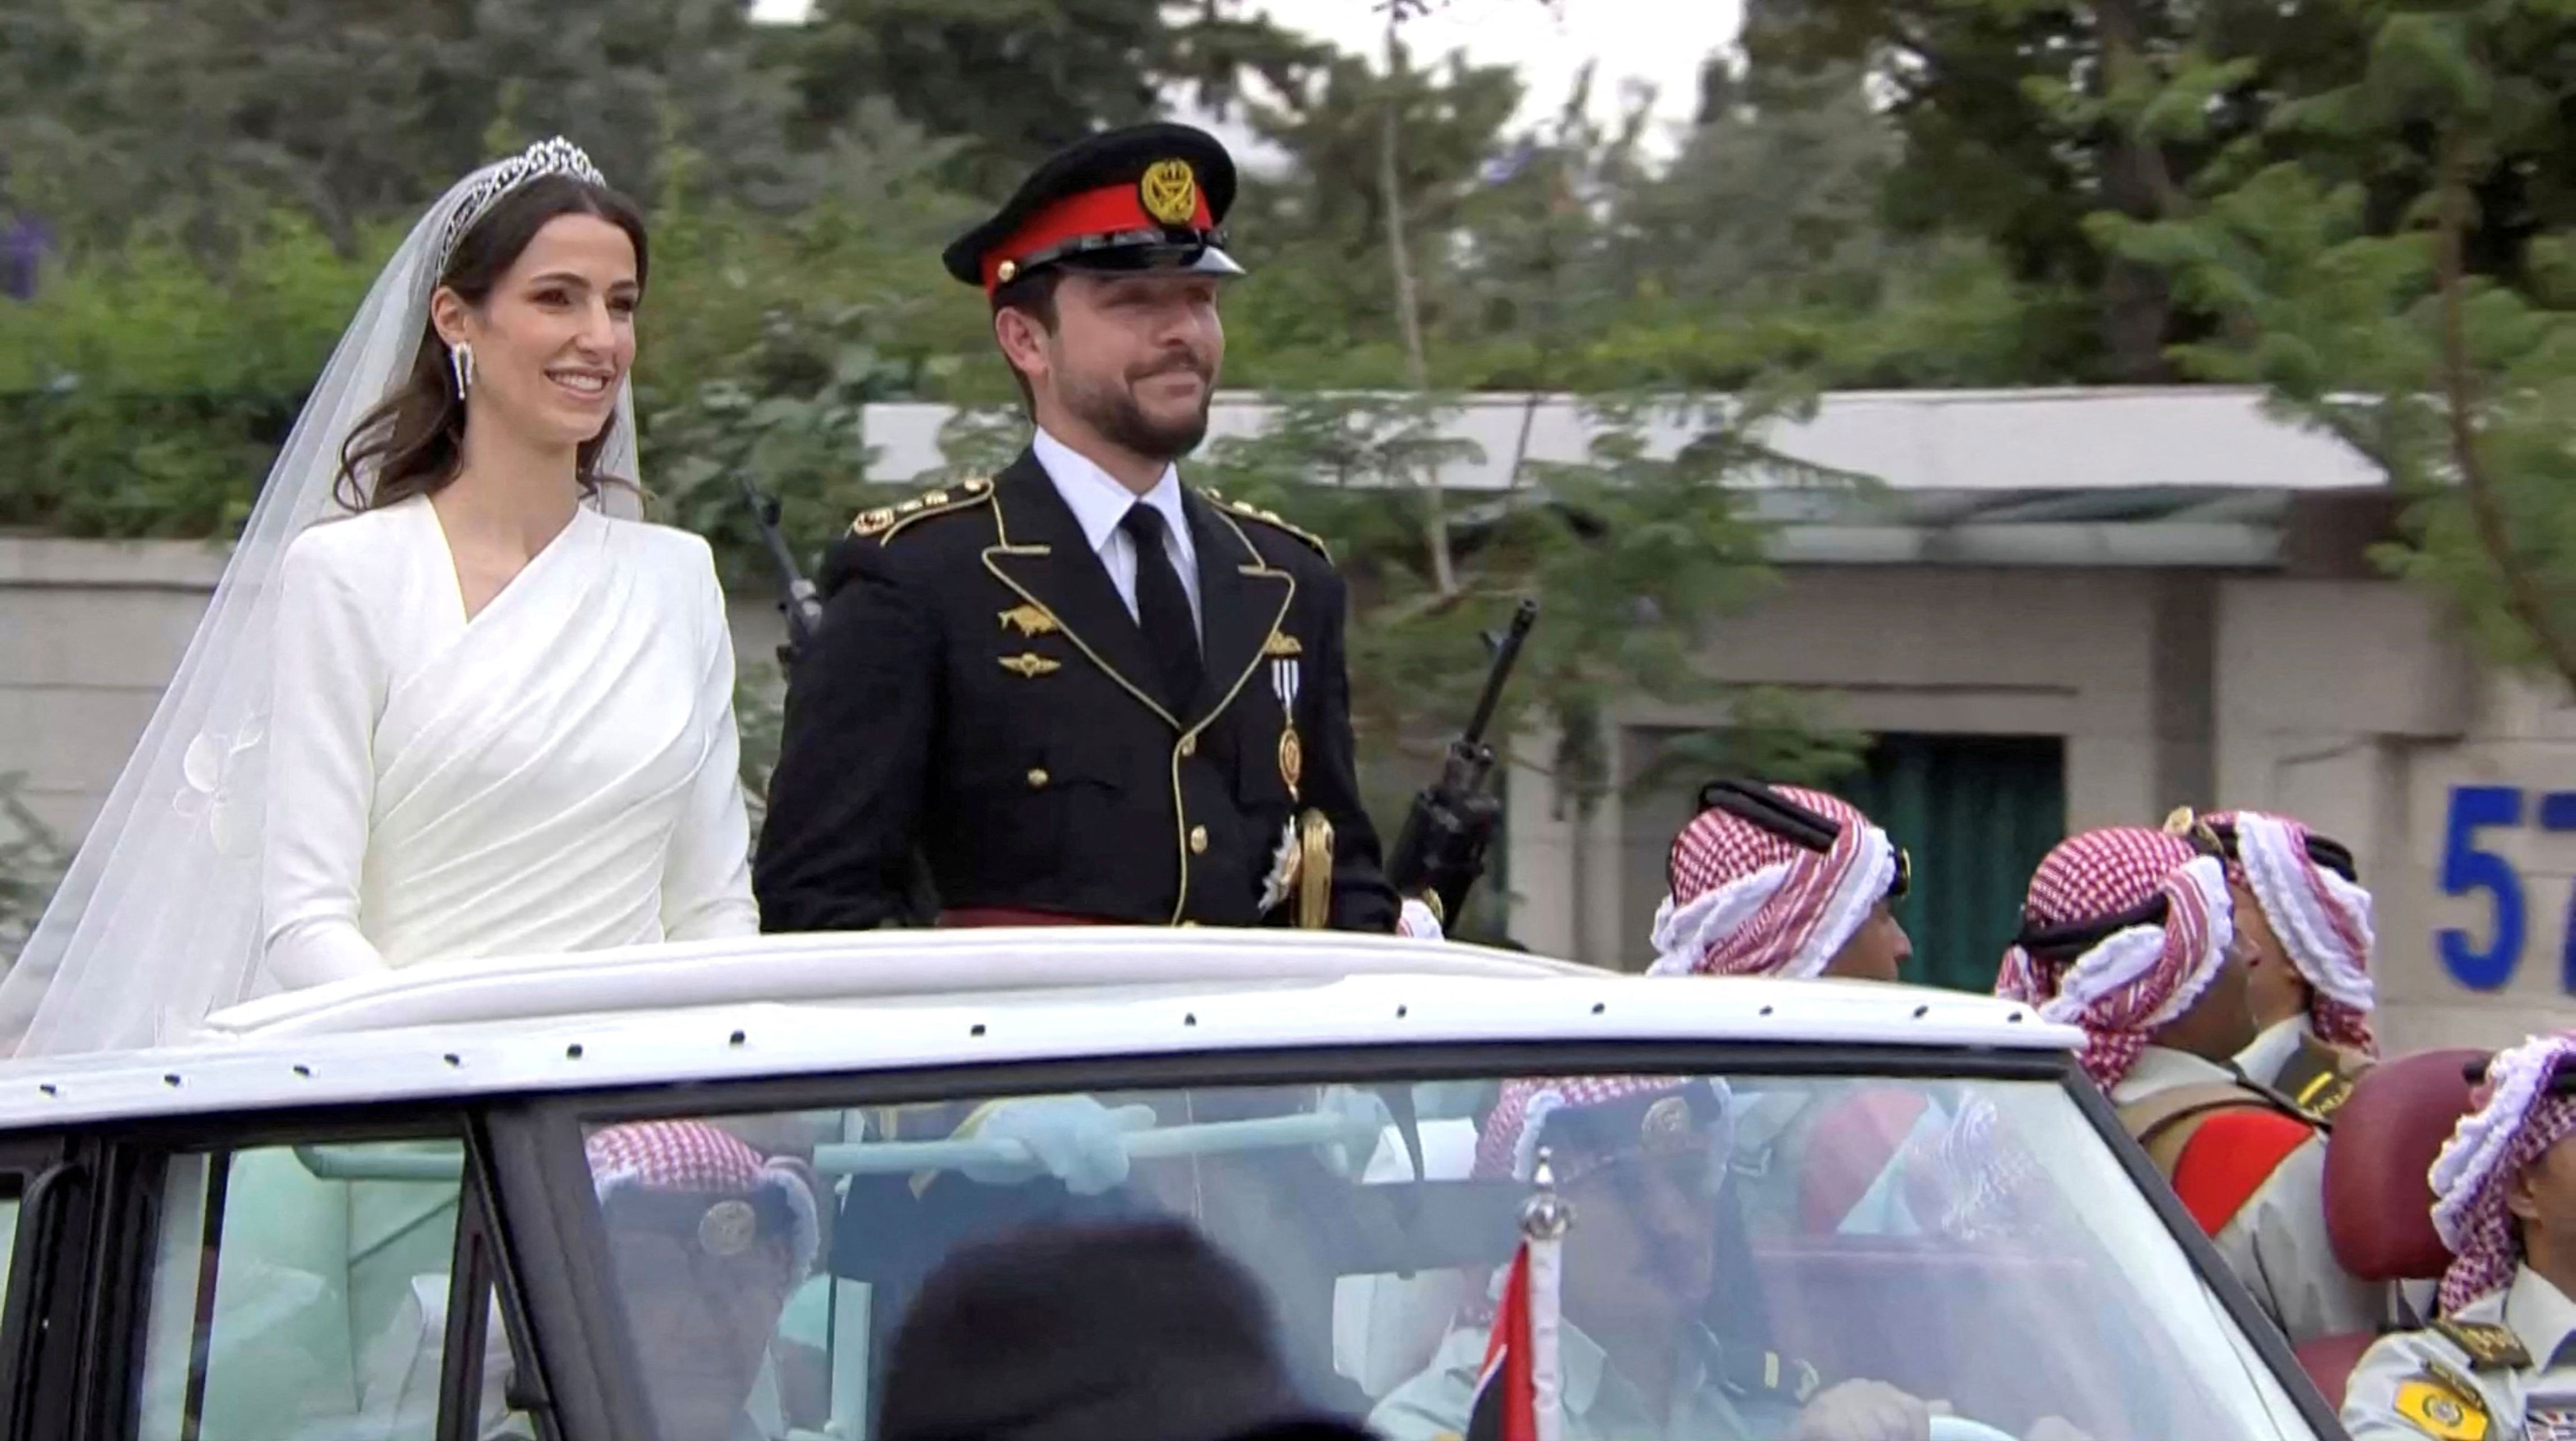 prince hussein and princess rajwa of jordan are expecting their first child